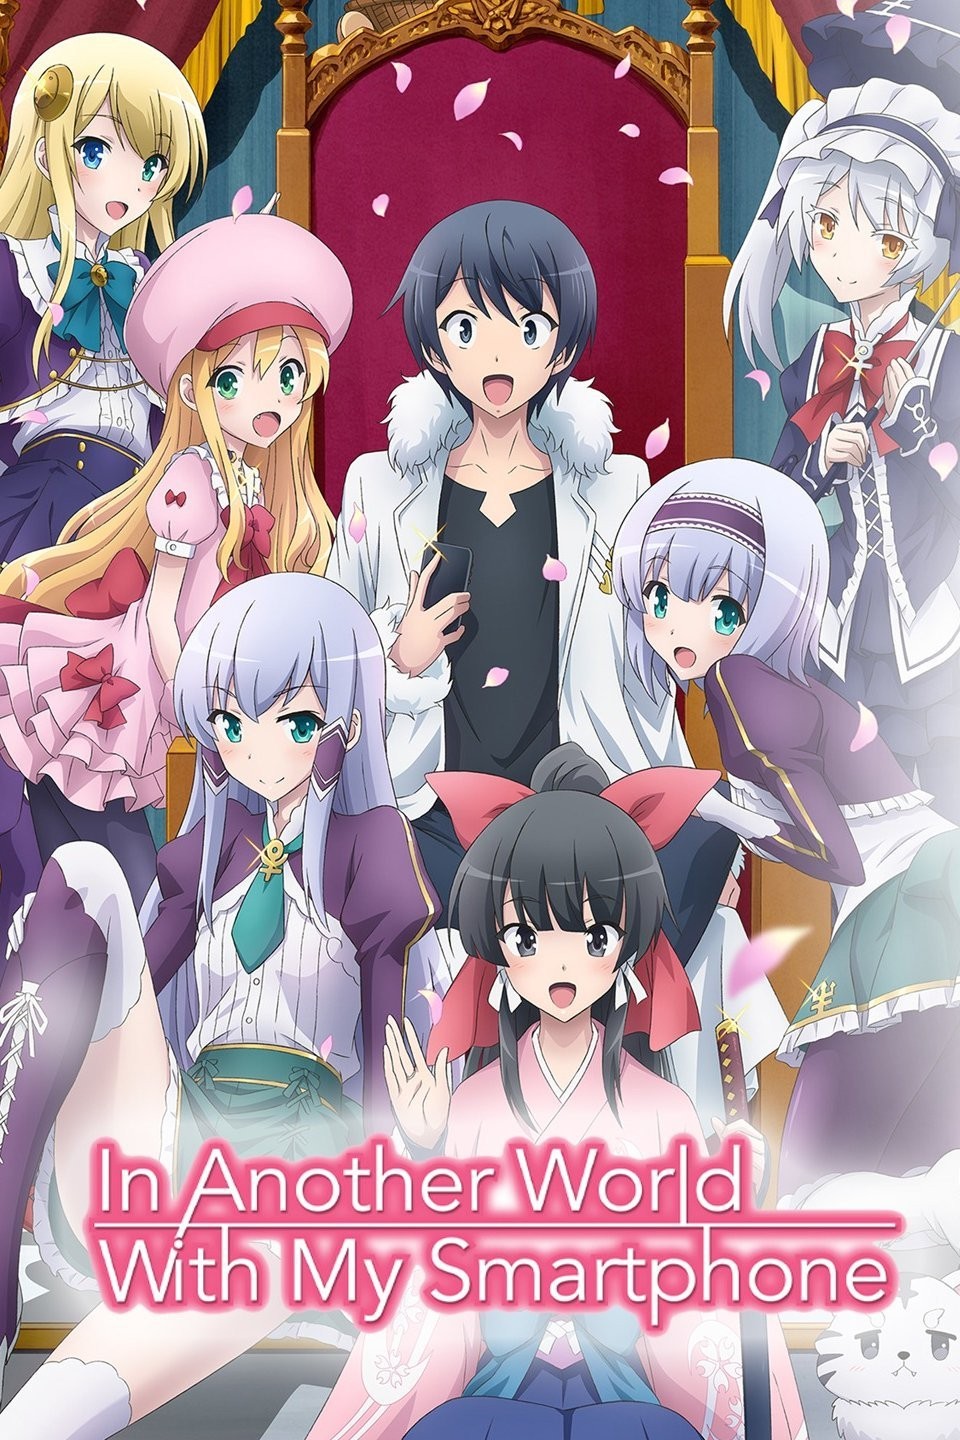 In Another World With My Smartphone 2 - Anime Series Review